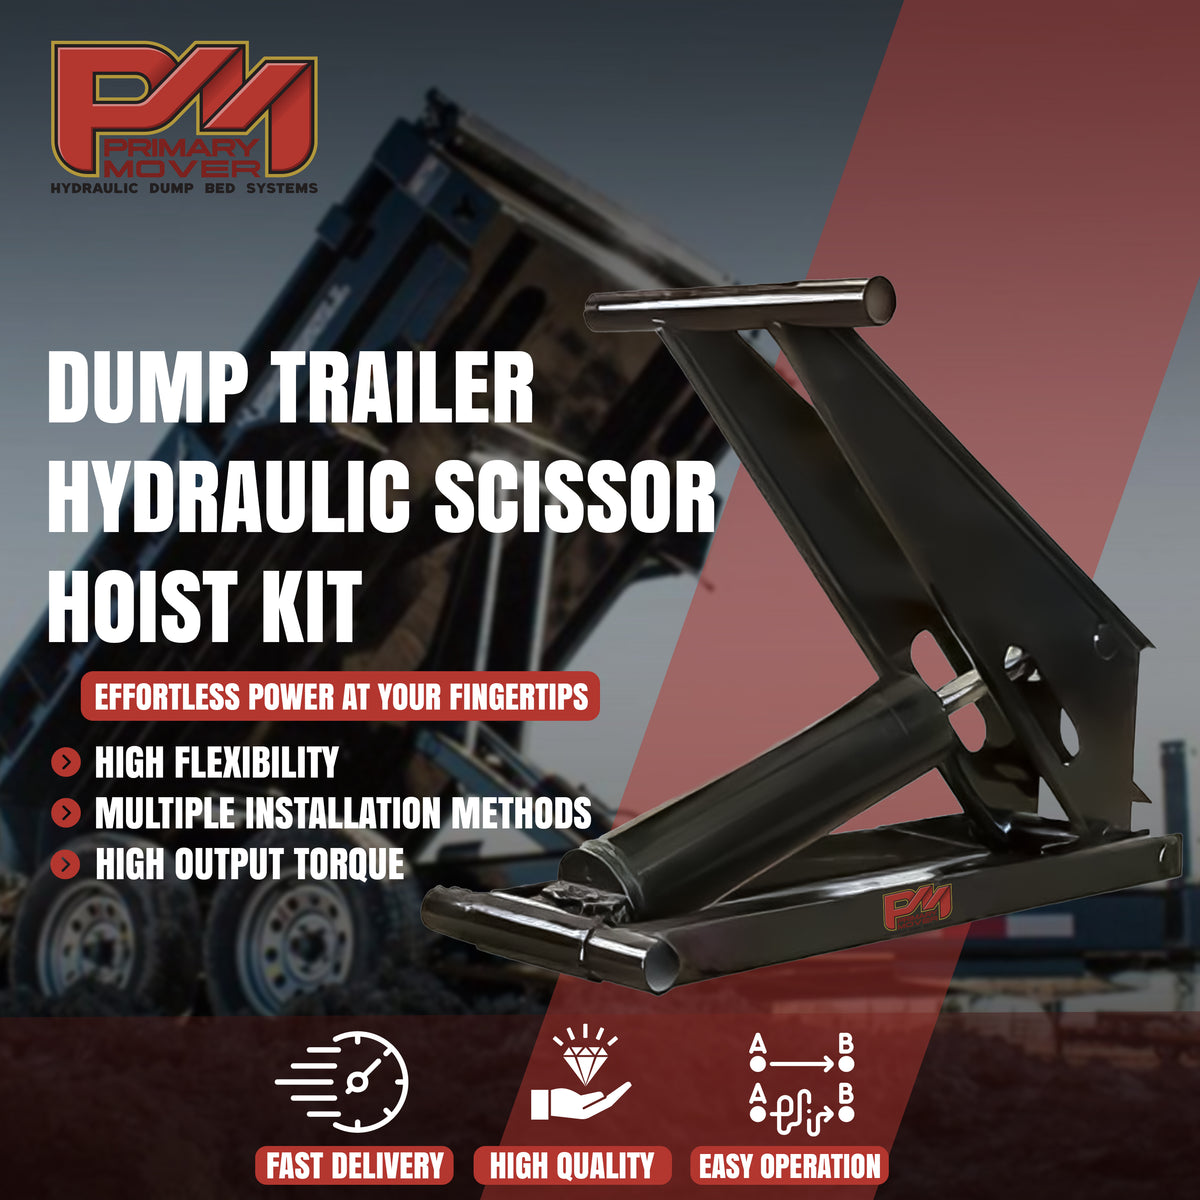 Hydraulic Scissor Hoist Kit - 8 Ton Capacity - Fits 10-14' Dump Body | PF-516: Black metal lifter with text, red and white logo, and tool components. Includes cylinder, mounting brackets, hydraulic pump, and safety features.